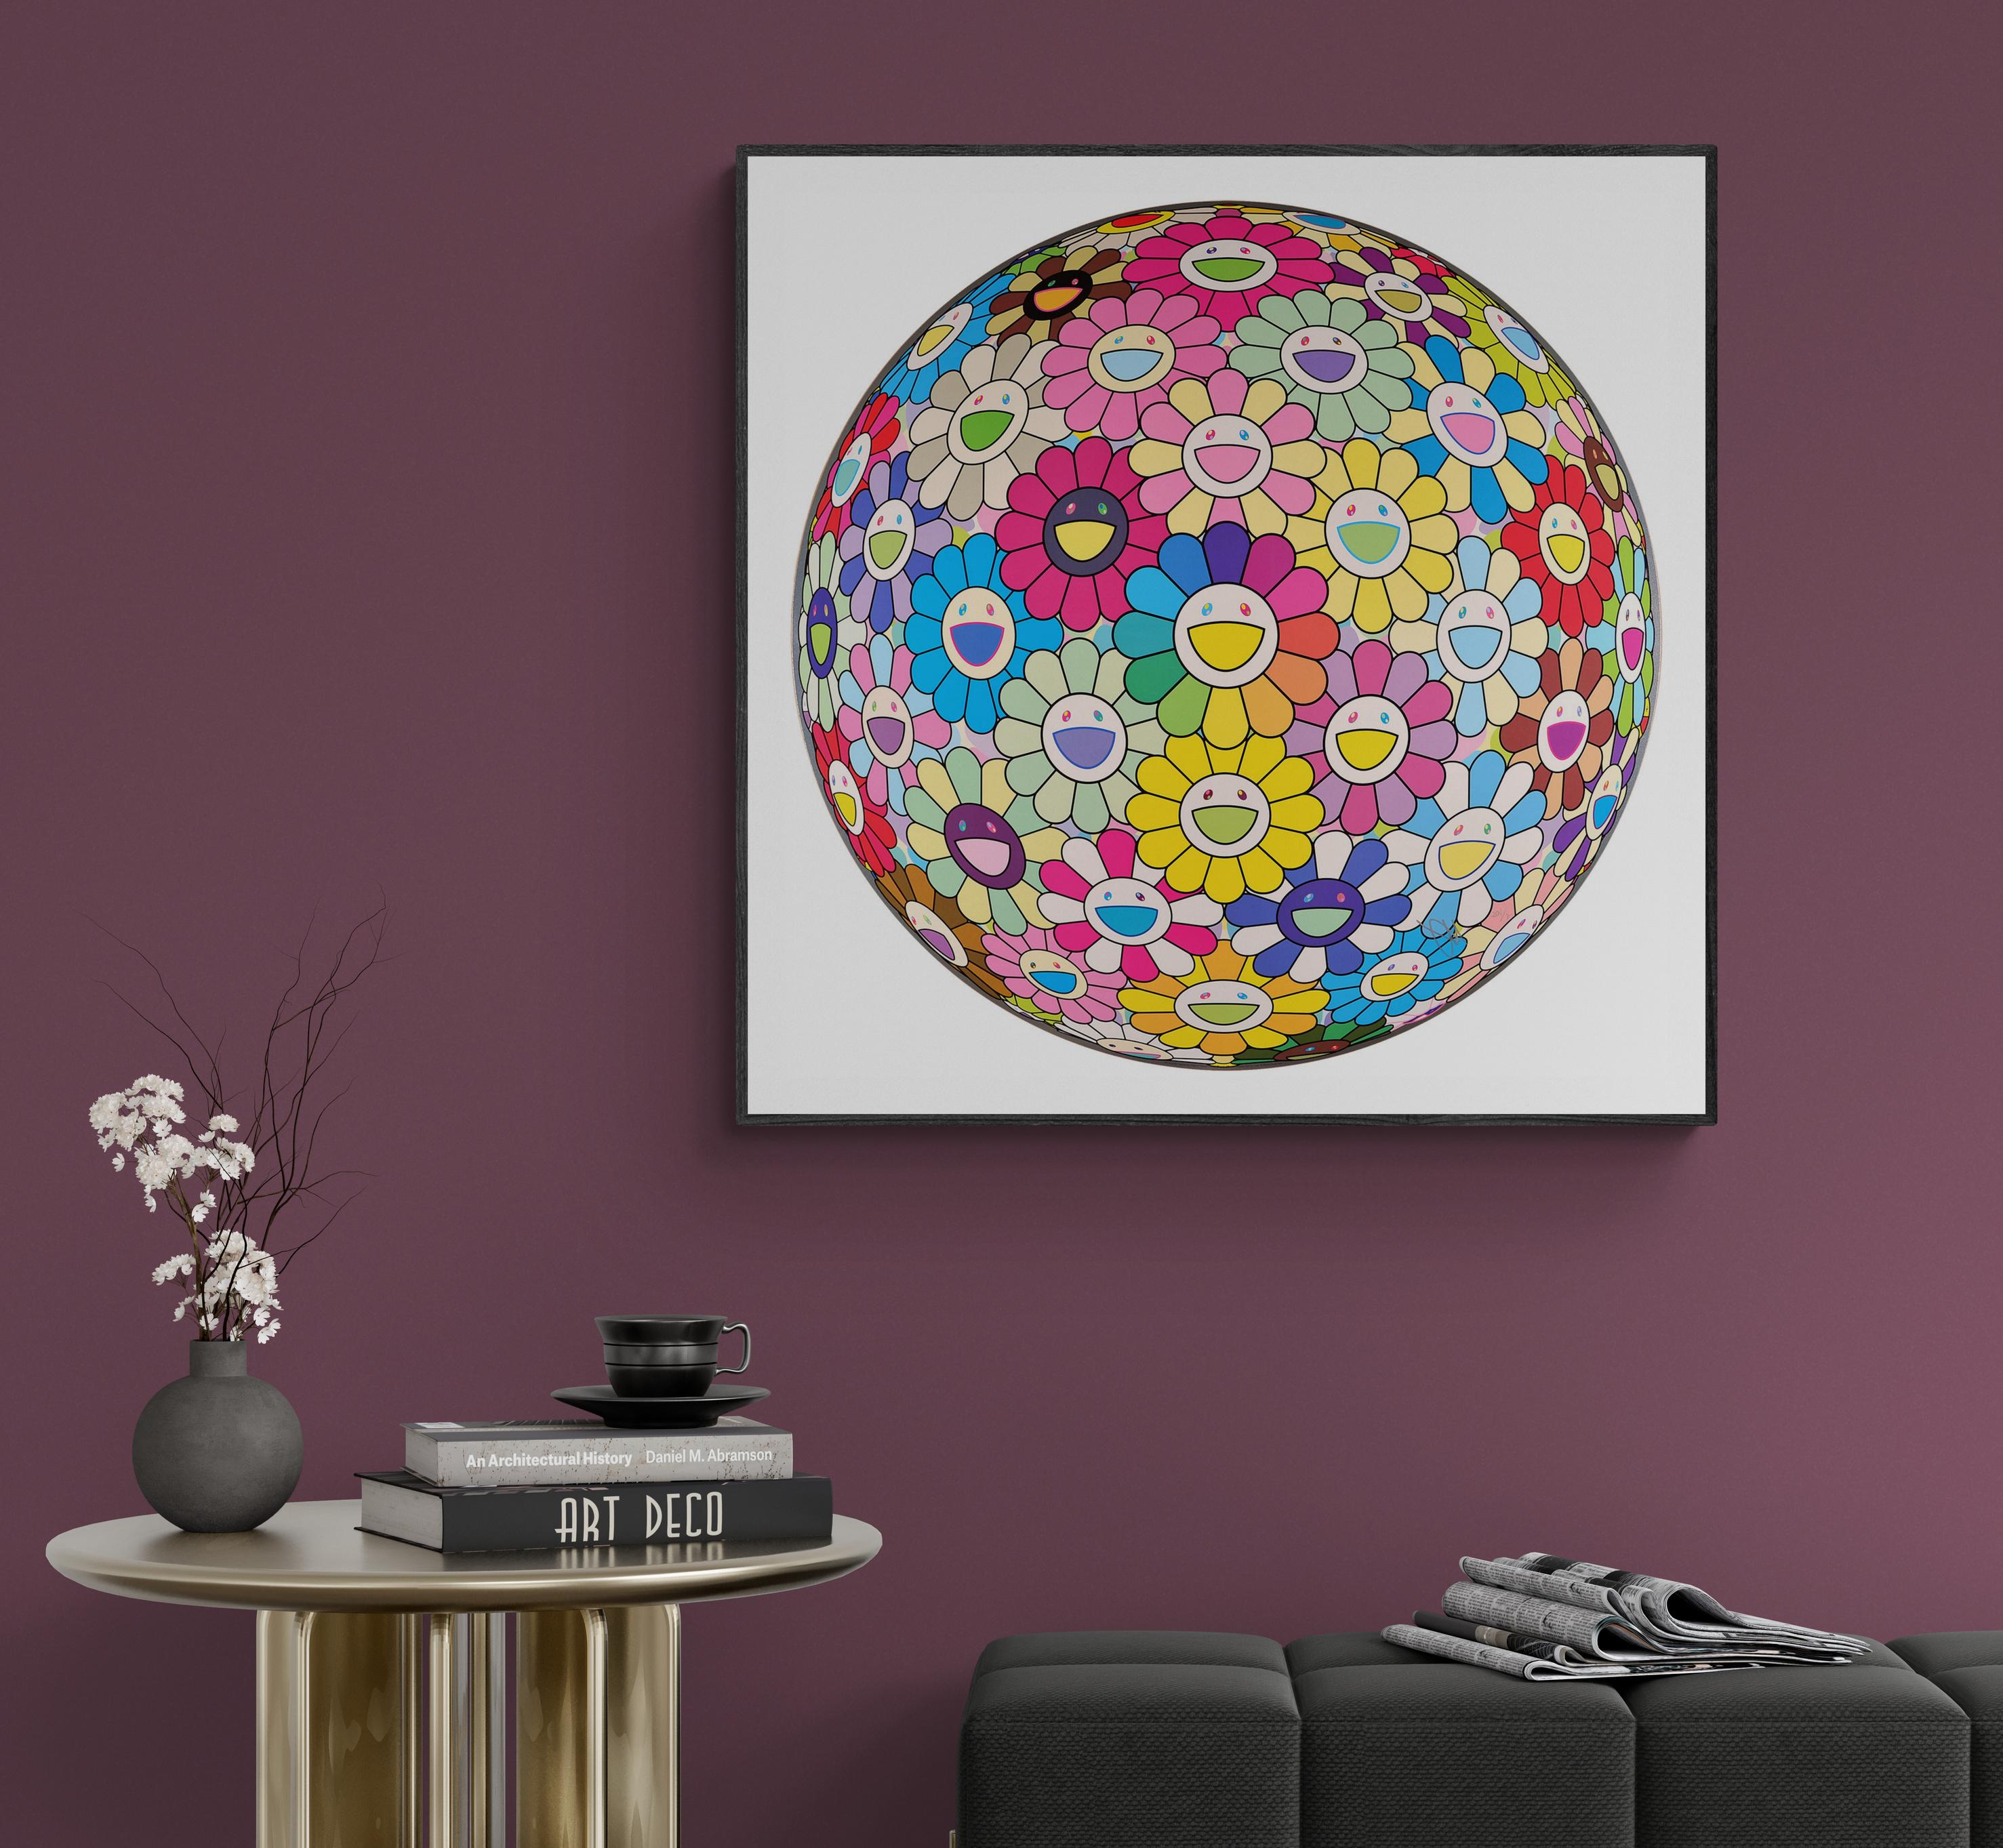 TAKASHI MURAKAMI - BURYING MY FACE IN THE FIELD OF FLOWERS
Date of creation: 2022
Medium: Offset lithograph with cold stamp and high gloss varnishing on paper
Edition number: 201/300
Size: 71 cm Ø
Condition: In mint conditions and never